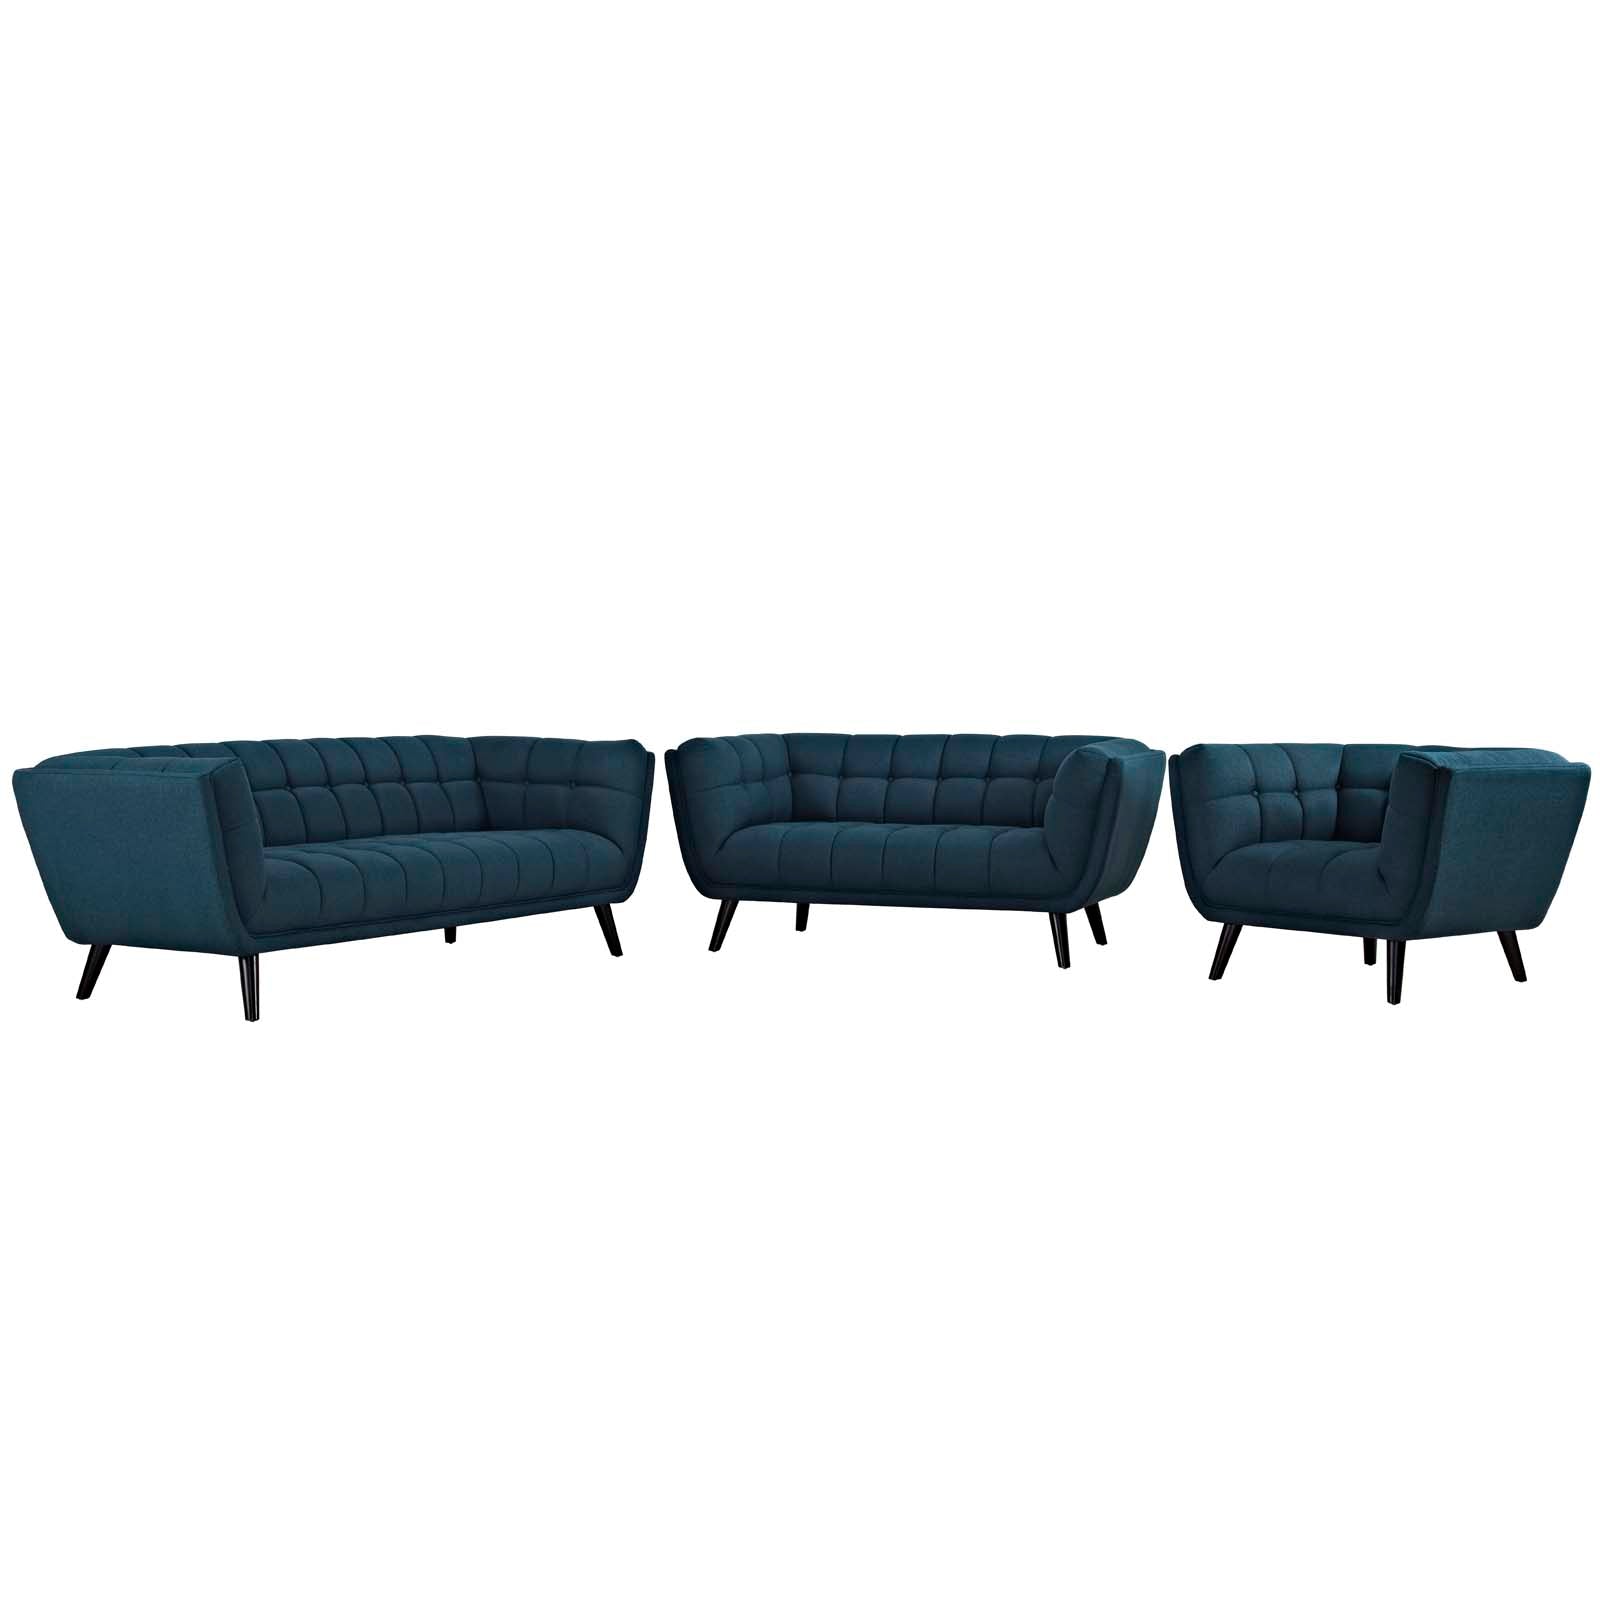 Bestow 3 Piece Upholstered Fabric Sofa Loveseat and Armchair Set